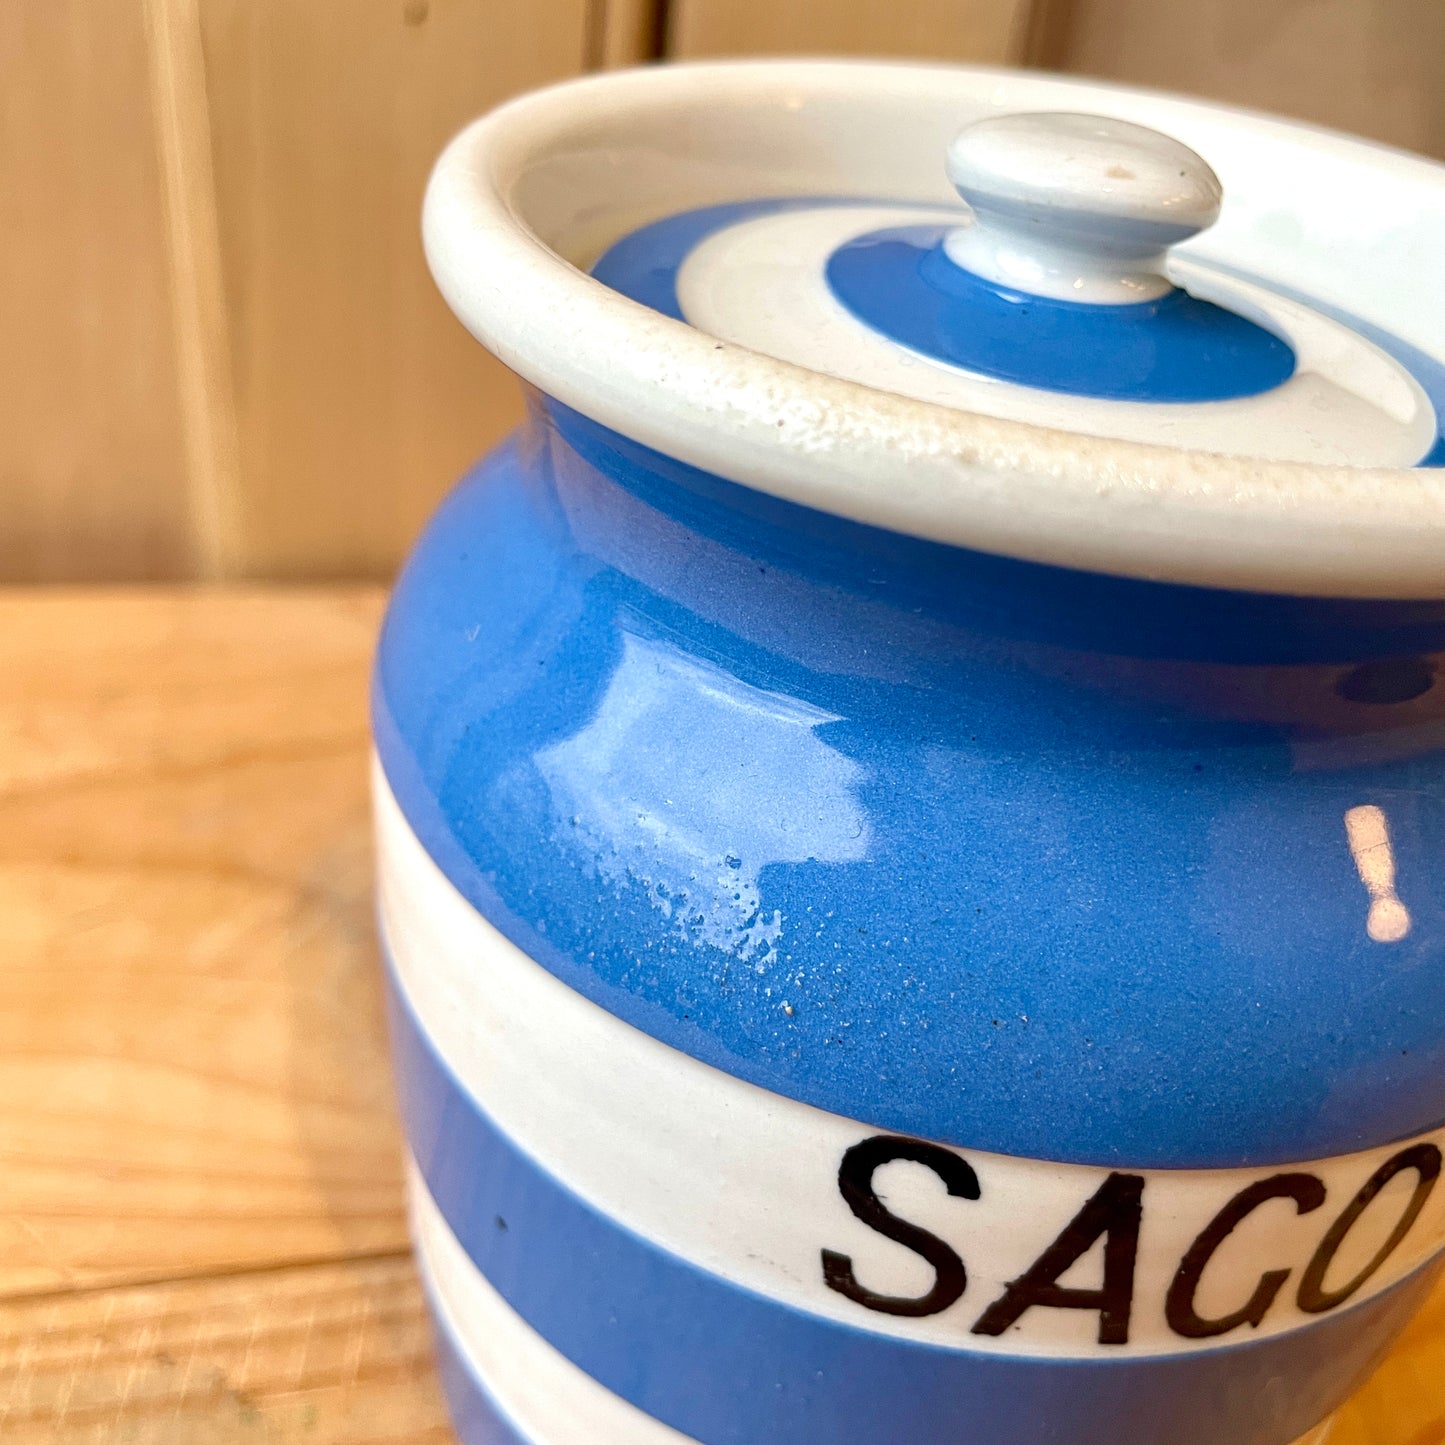 TG Green Blue and White Sago Canister